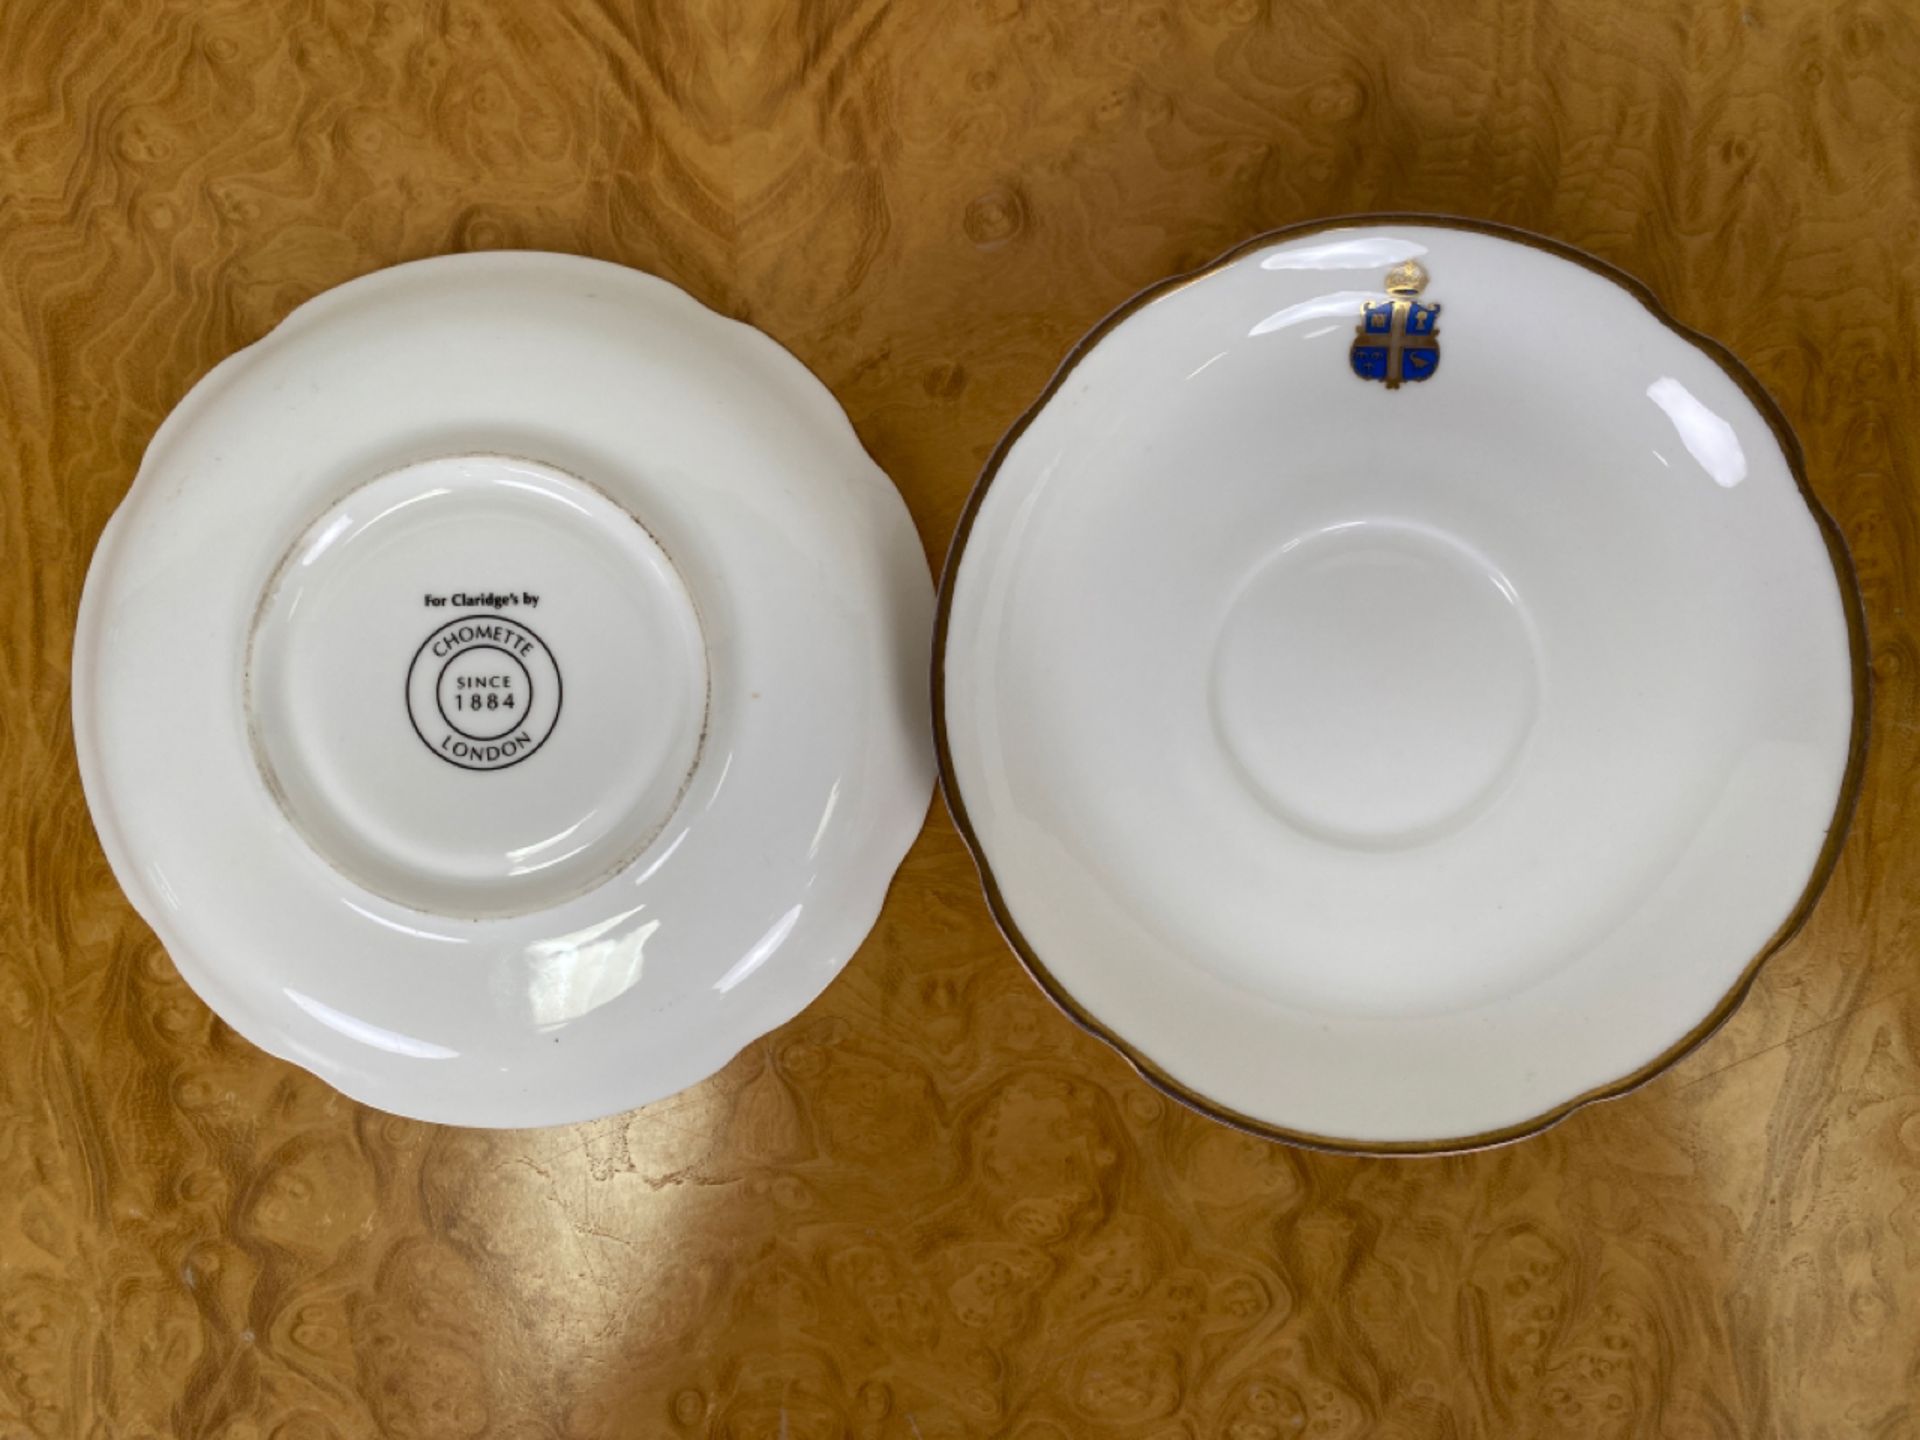 Set of Crested Crockery for Claridge's by Chommette 1884 - Image 15 of 38